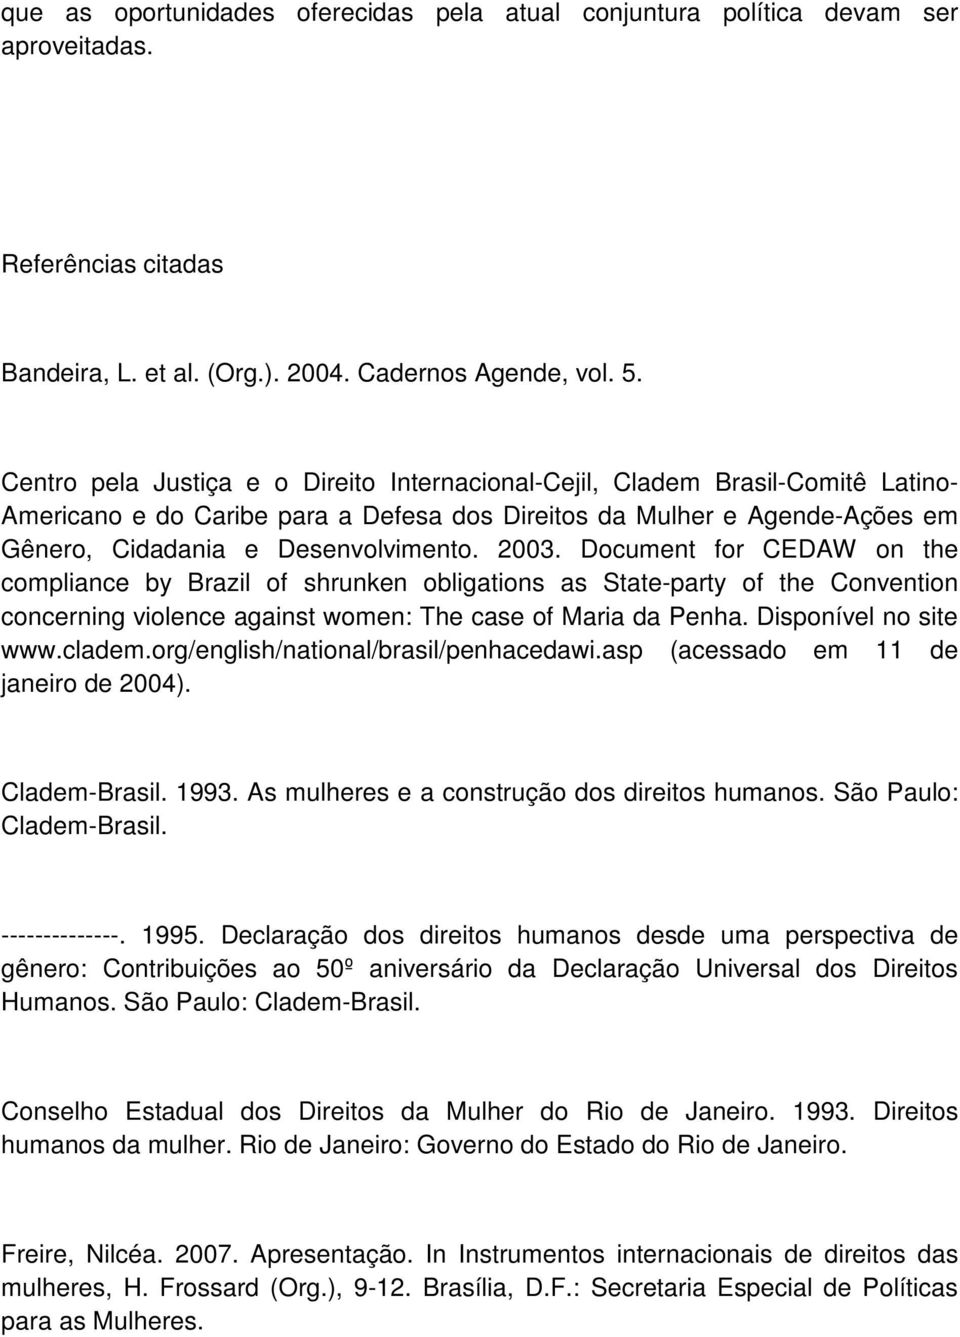 2003. Document for CEDAW on the compliance by Brazil of shrunken obligations as State-party of the Convention concerning violence against women: The case of Maria da Penha. Disponível no site www.